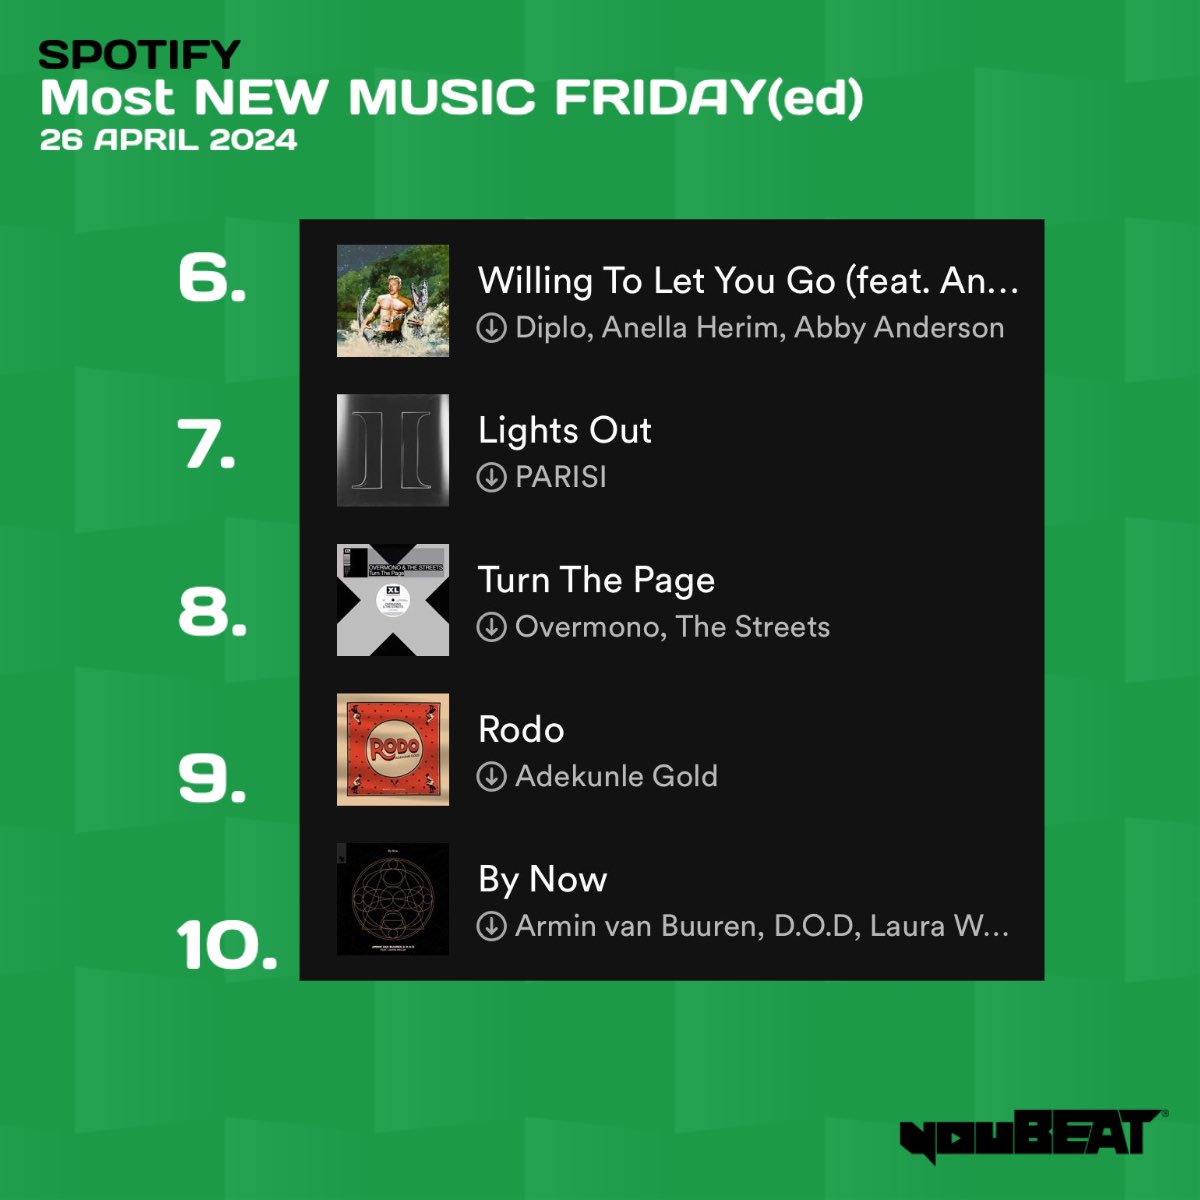 youBEAT MNMF(ed) - Dance/Electronic - April 26th 2024 📊🎶

The 10 most #Spotify “New Music Fridayed” dance/electronic tracks of the week globally! 🌍(In chart order)

[Powered by #superfridaychart]
▶️ sptfy.com/MNMFed